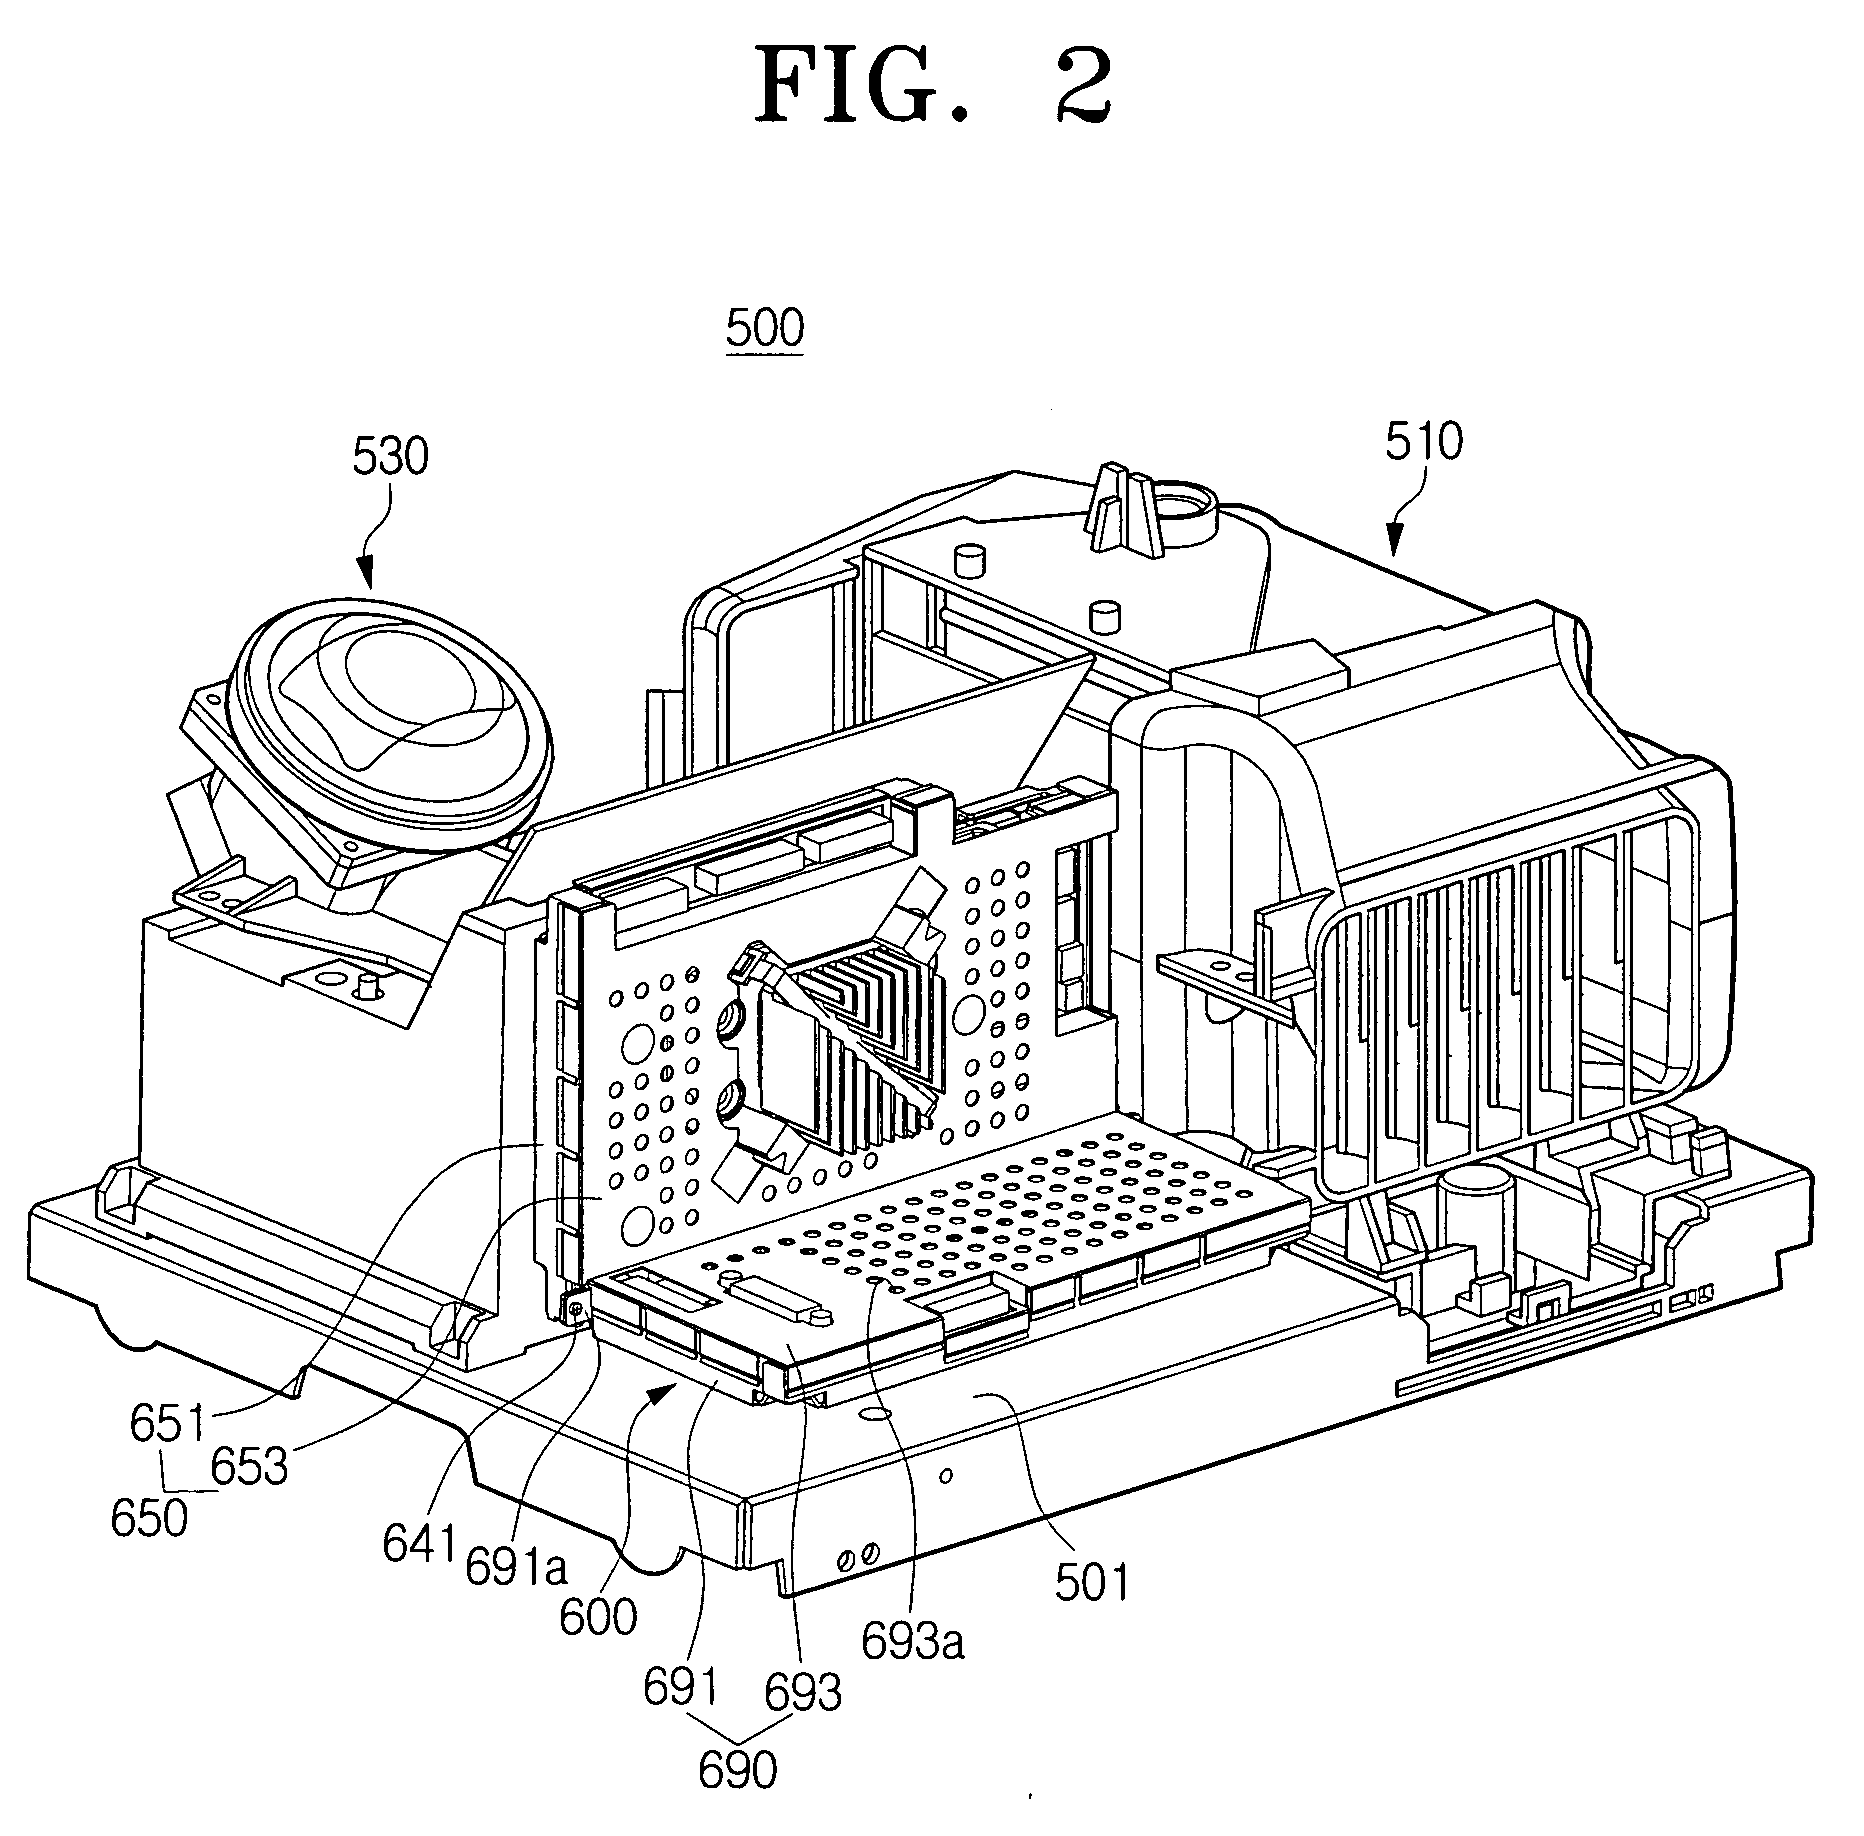 Digital micro-mirror device assembly and optical projection system using the same